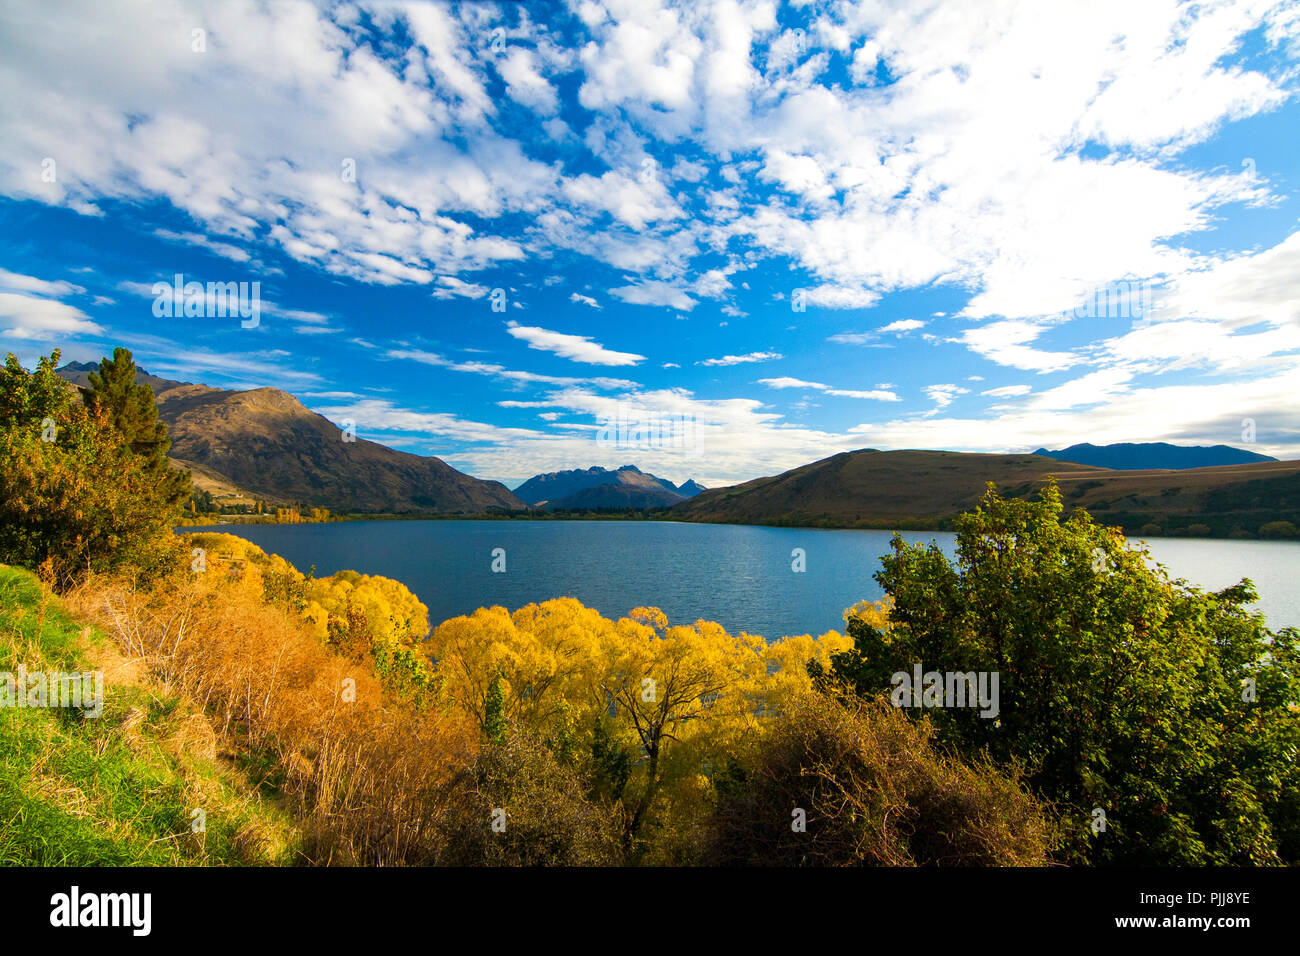 Autumn landscape colourful scenery with trees, lake and golden hills of Central Otago region, Lake Hayes, village Arrowtown, New Zealand Stock Photo